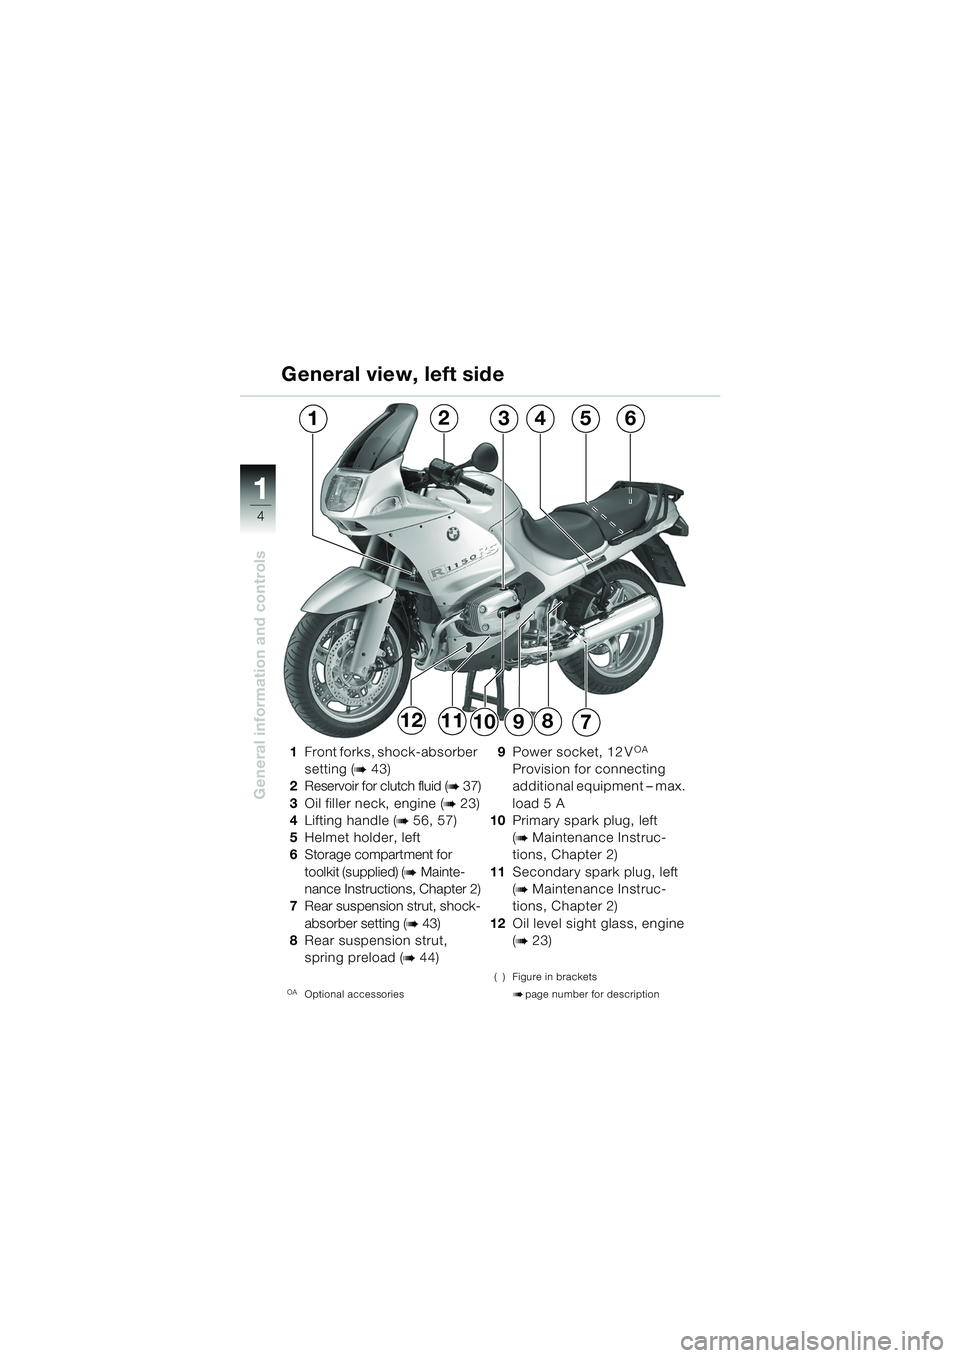 BMW MOTORRAD R 1150 RS 2002  Riders Manual (in English) 1
General information and controls
4
987
124356
101112
1Front forks, shock-absorber 
setting (
b 43)
2 Reservoir for clutch fluid (
b 37)
3 Oil filler neck, engine (
b 23)
4 Lifting handle (
b 56, 57)